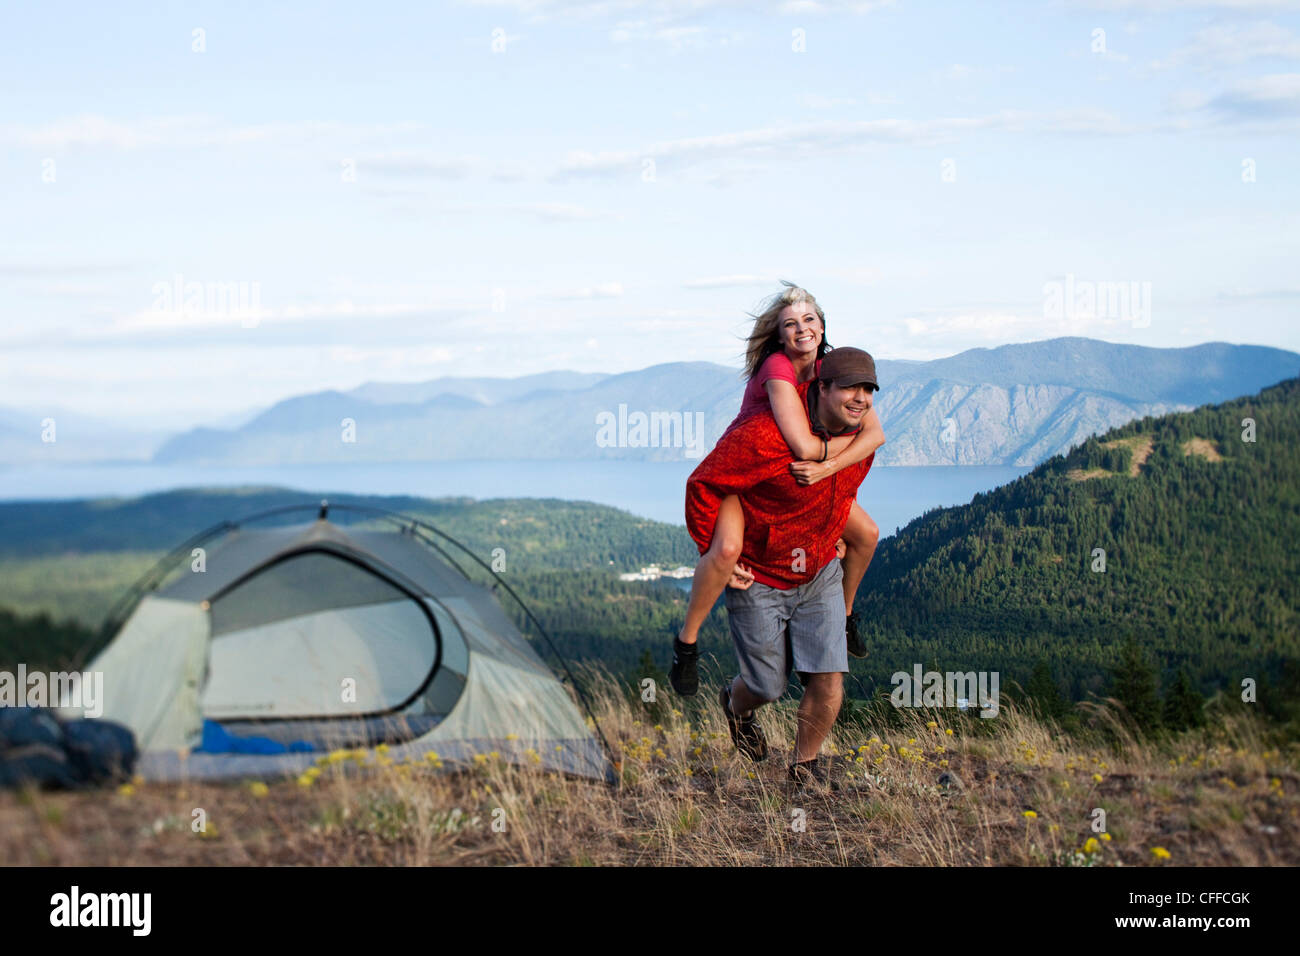 A happy couple smile and laugh on a backpacking and camping trip in Idaho. Stock Photo